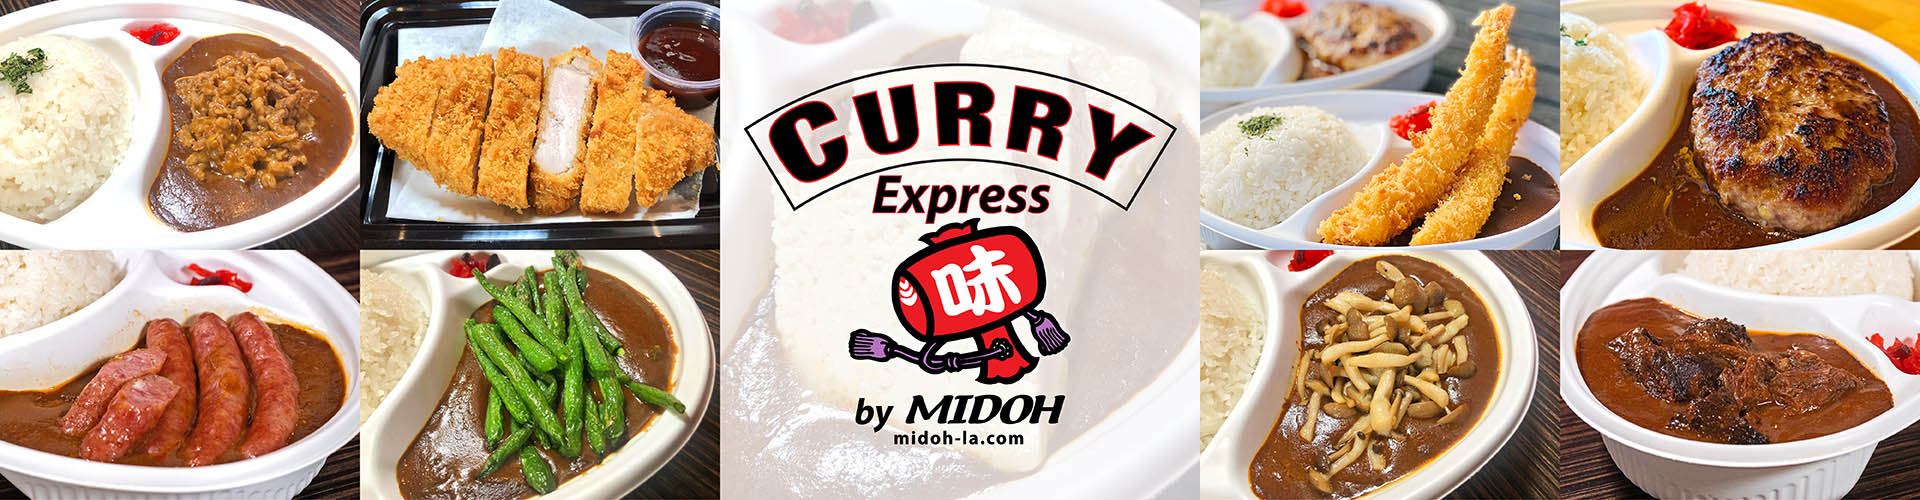 CURRY Express by MIDOH - Go to www.midoh-la.com to learn more the detail.